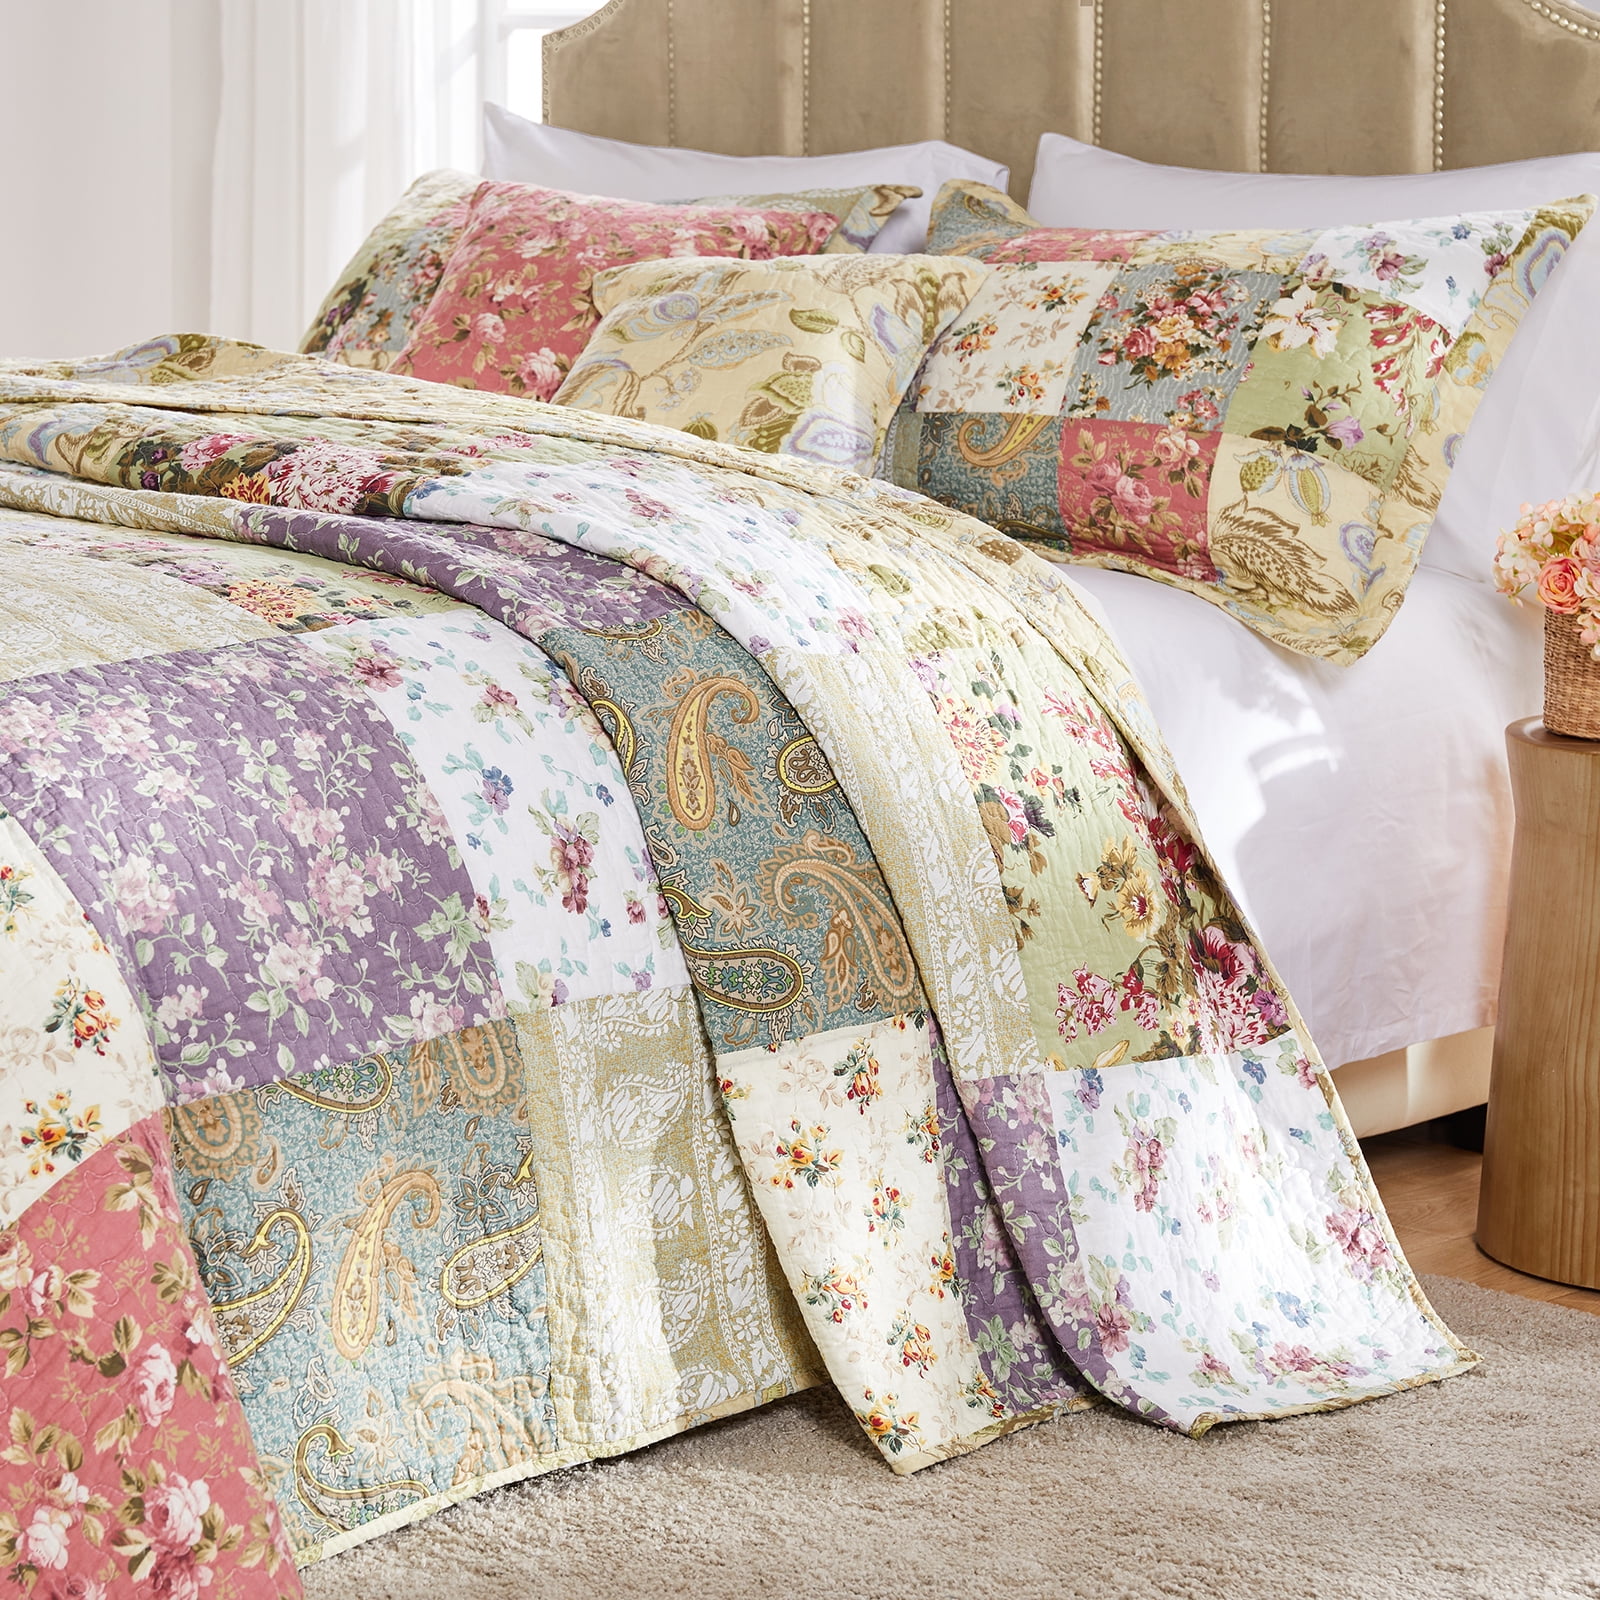 Details about   BEAUTIFUL SHABBY CHIC COTTAGE LIGHT BLUE WHITE RUFFLE COUNTRY ELEGANT QUILT SET 